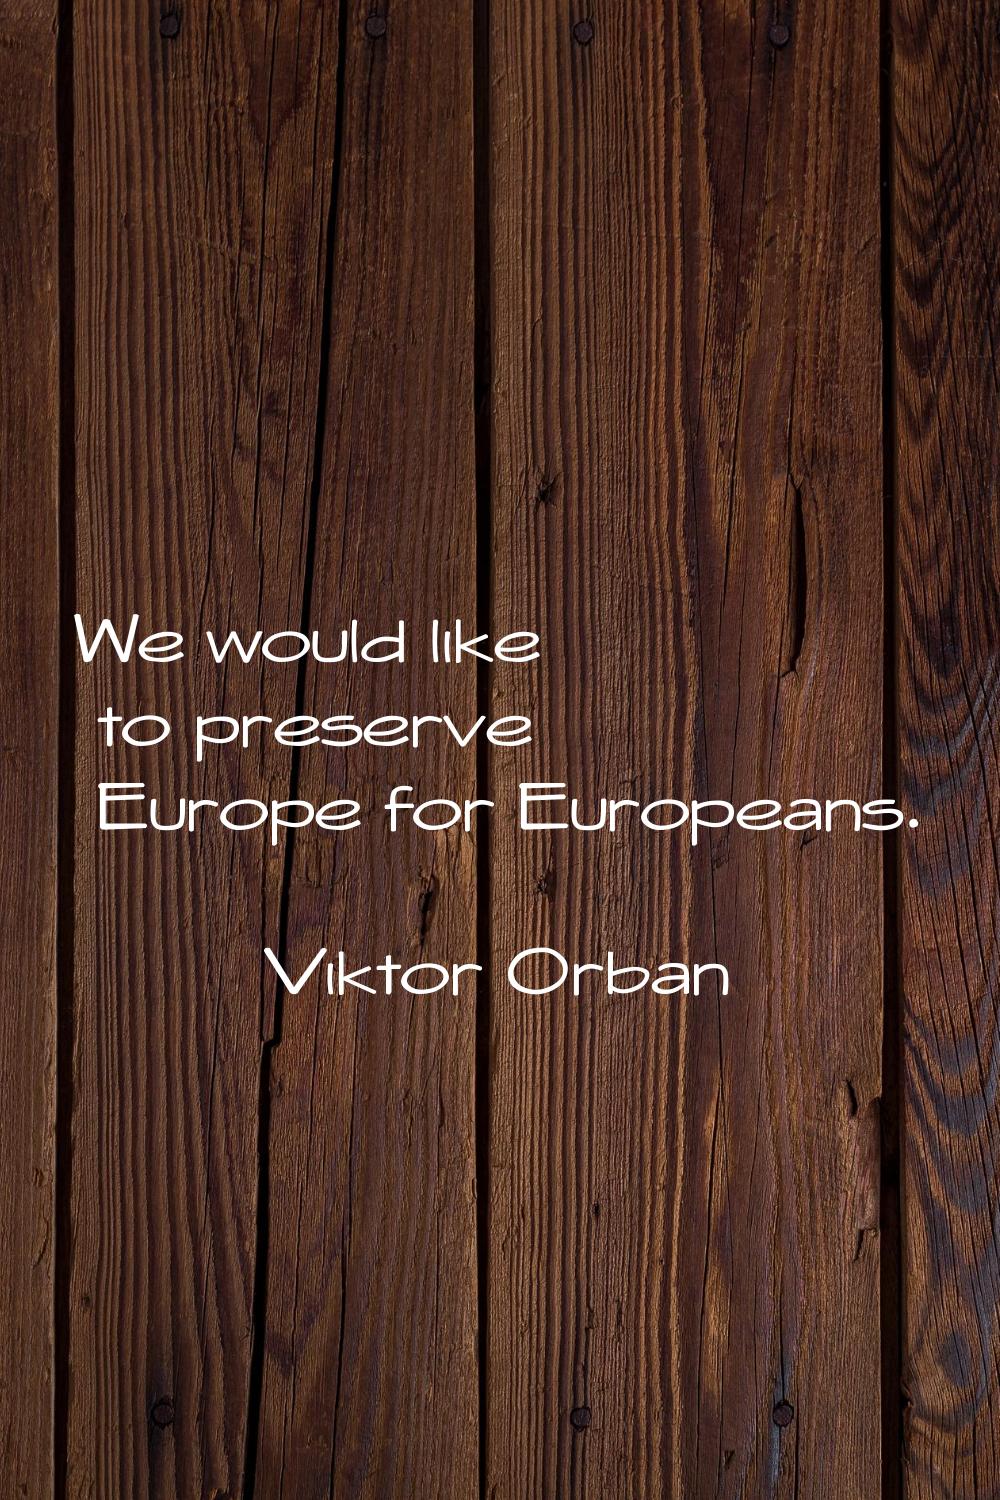 We would like to preserve Europe for Europeans.